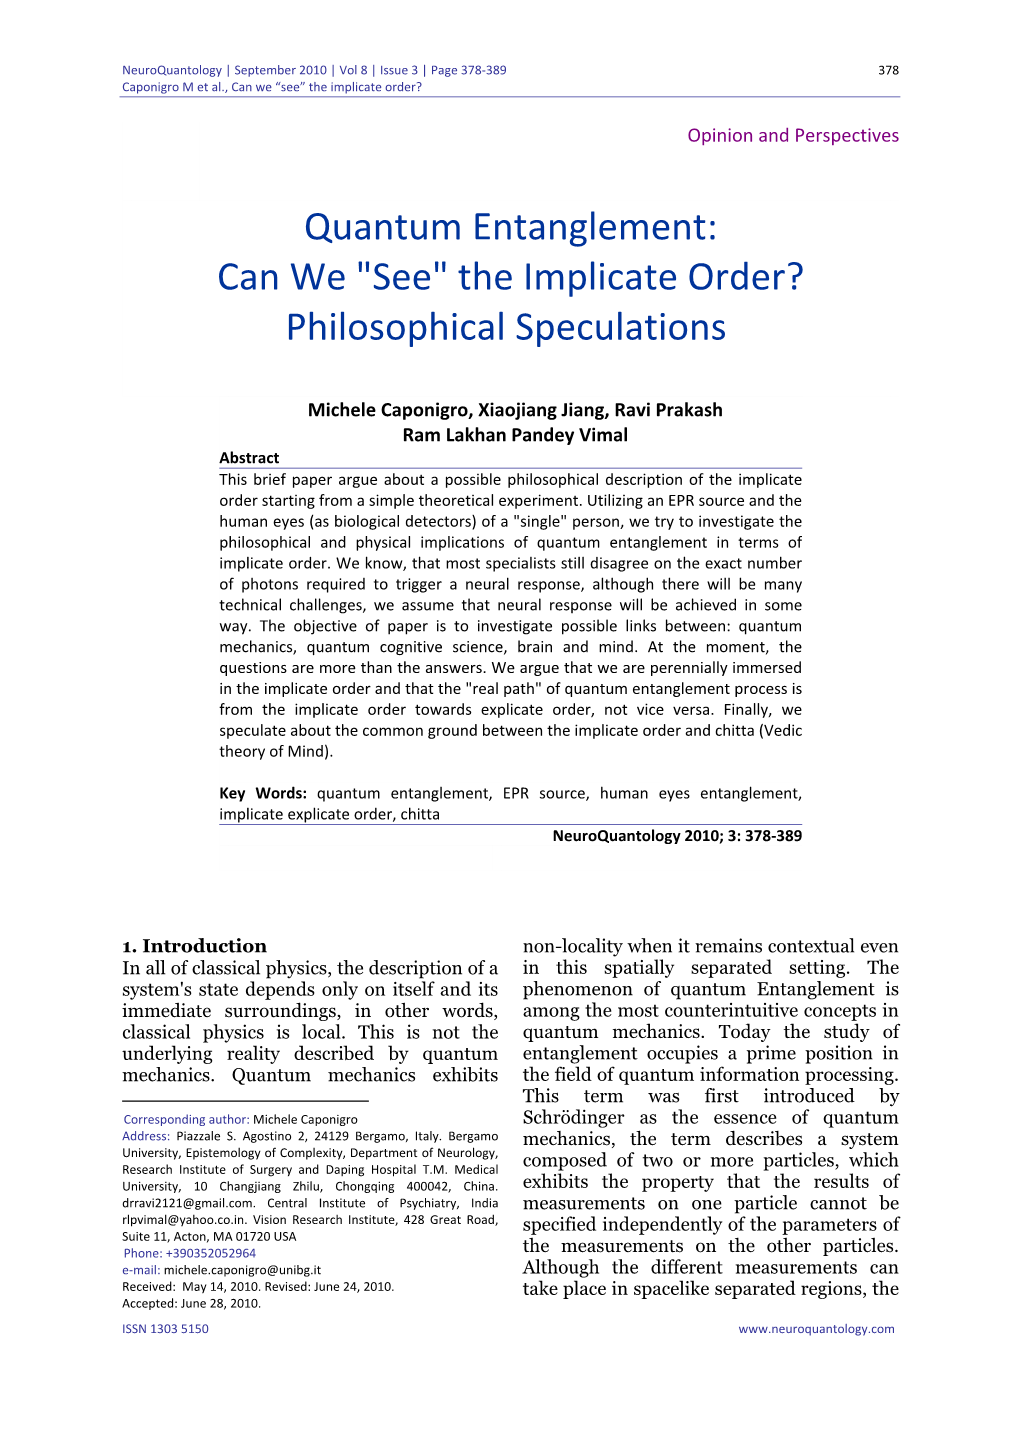 Quantum Entanglement: Can We "See" the Implicate Order? Philosophical Speculations